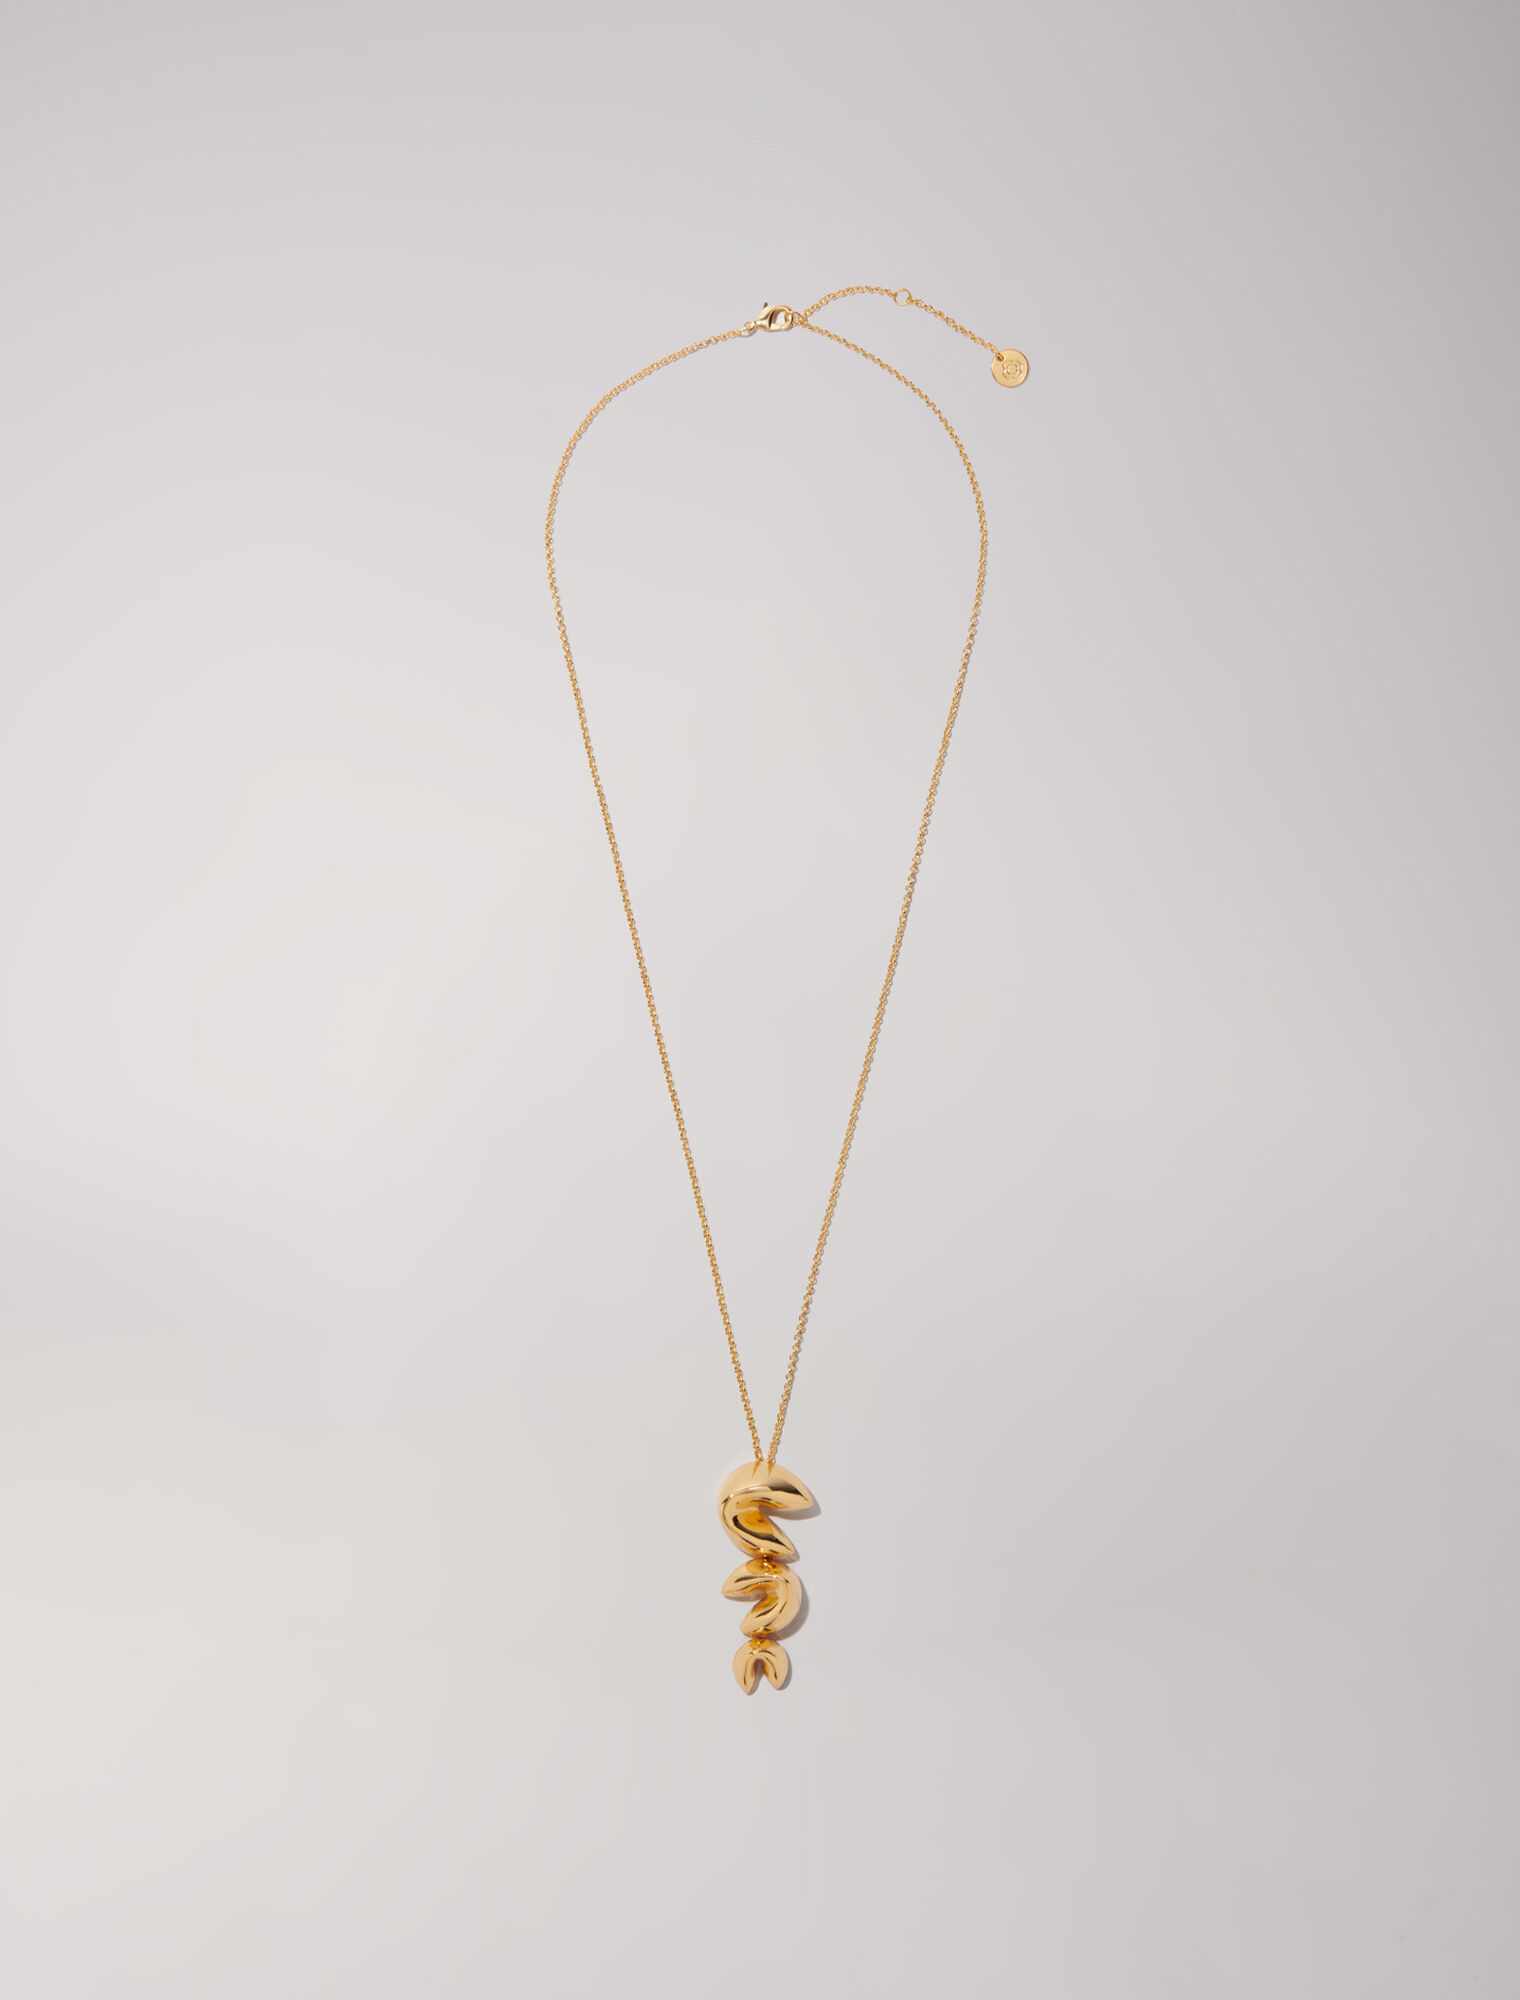 Long fortune cookie necklace